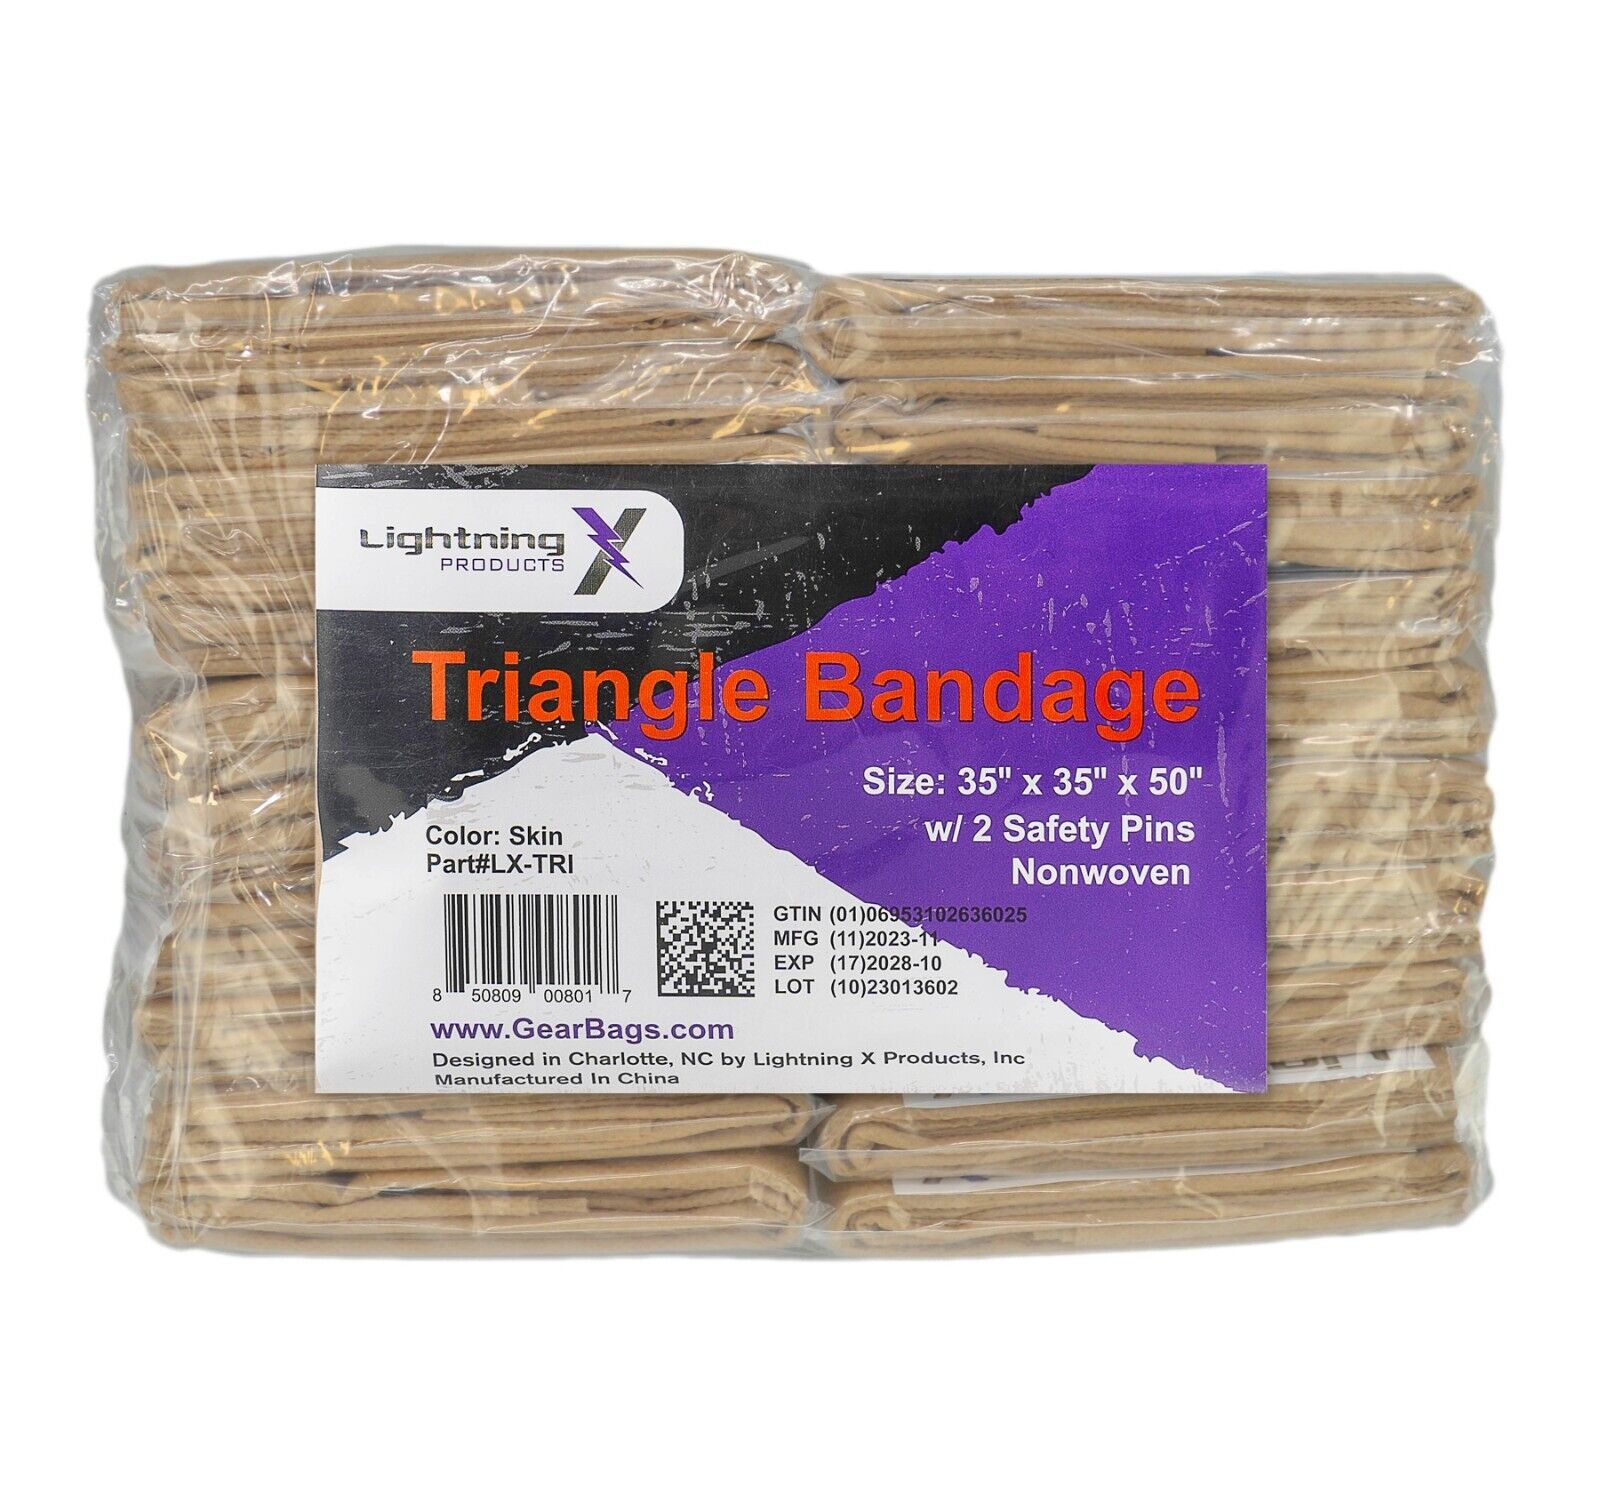 Lightning X Triangle Bandage w/ Safety Pins - Pack of 20 - Non Woven & Latex Fre